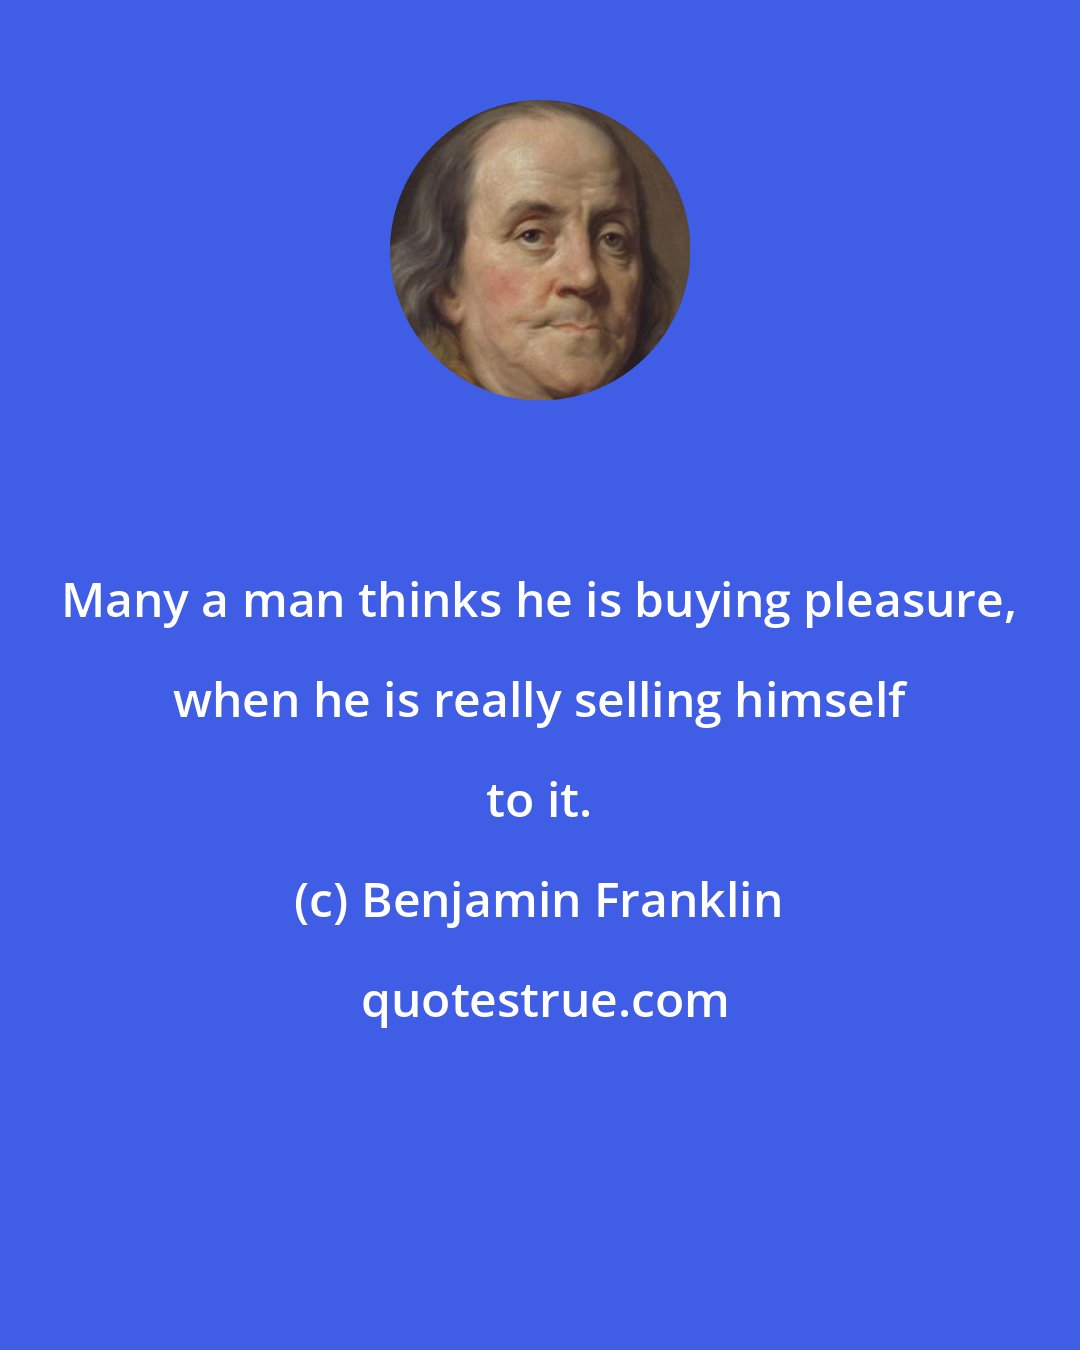 Benjamin Franklin: Many a man thinks he is buying pleasure, when he is really selling himself to it.